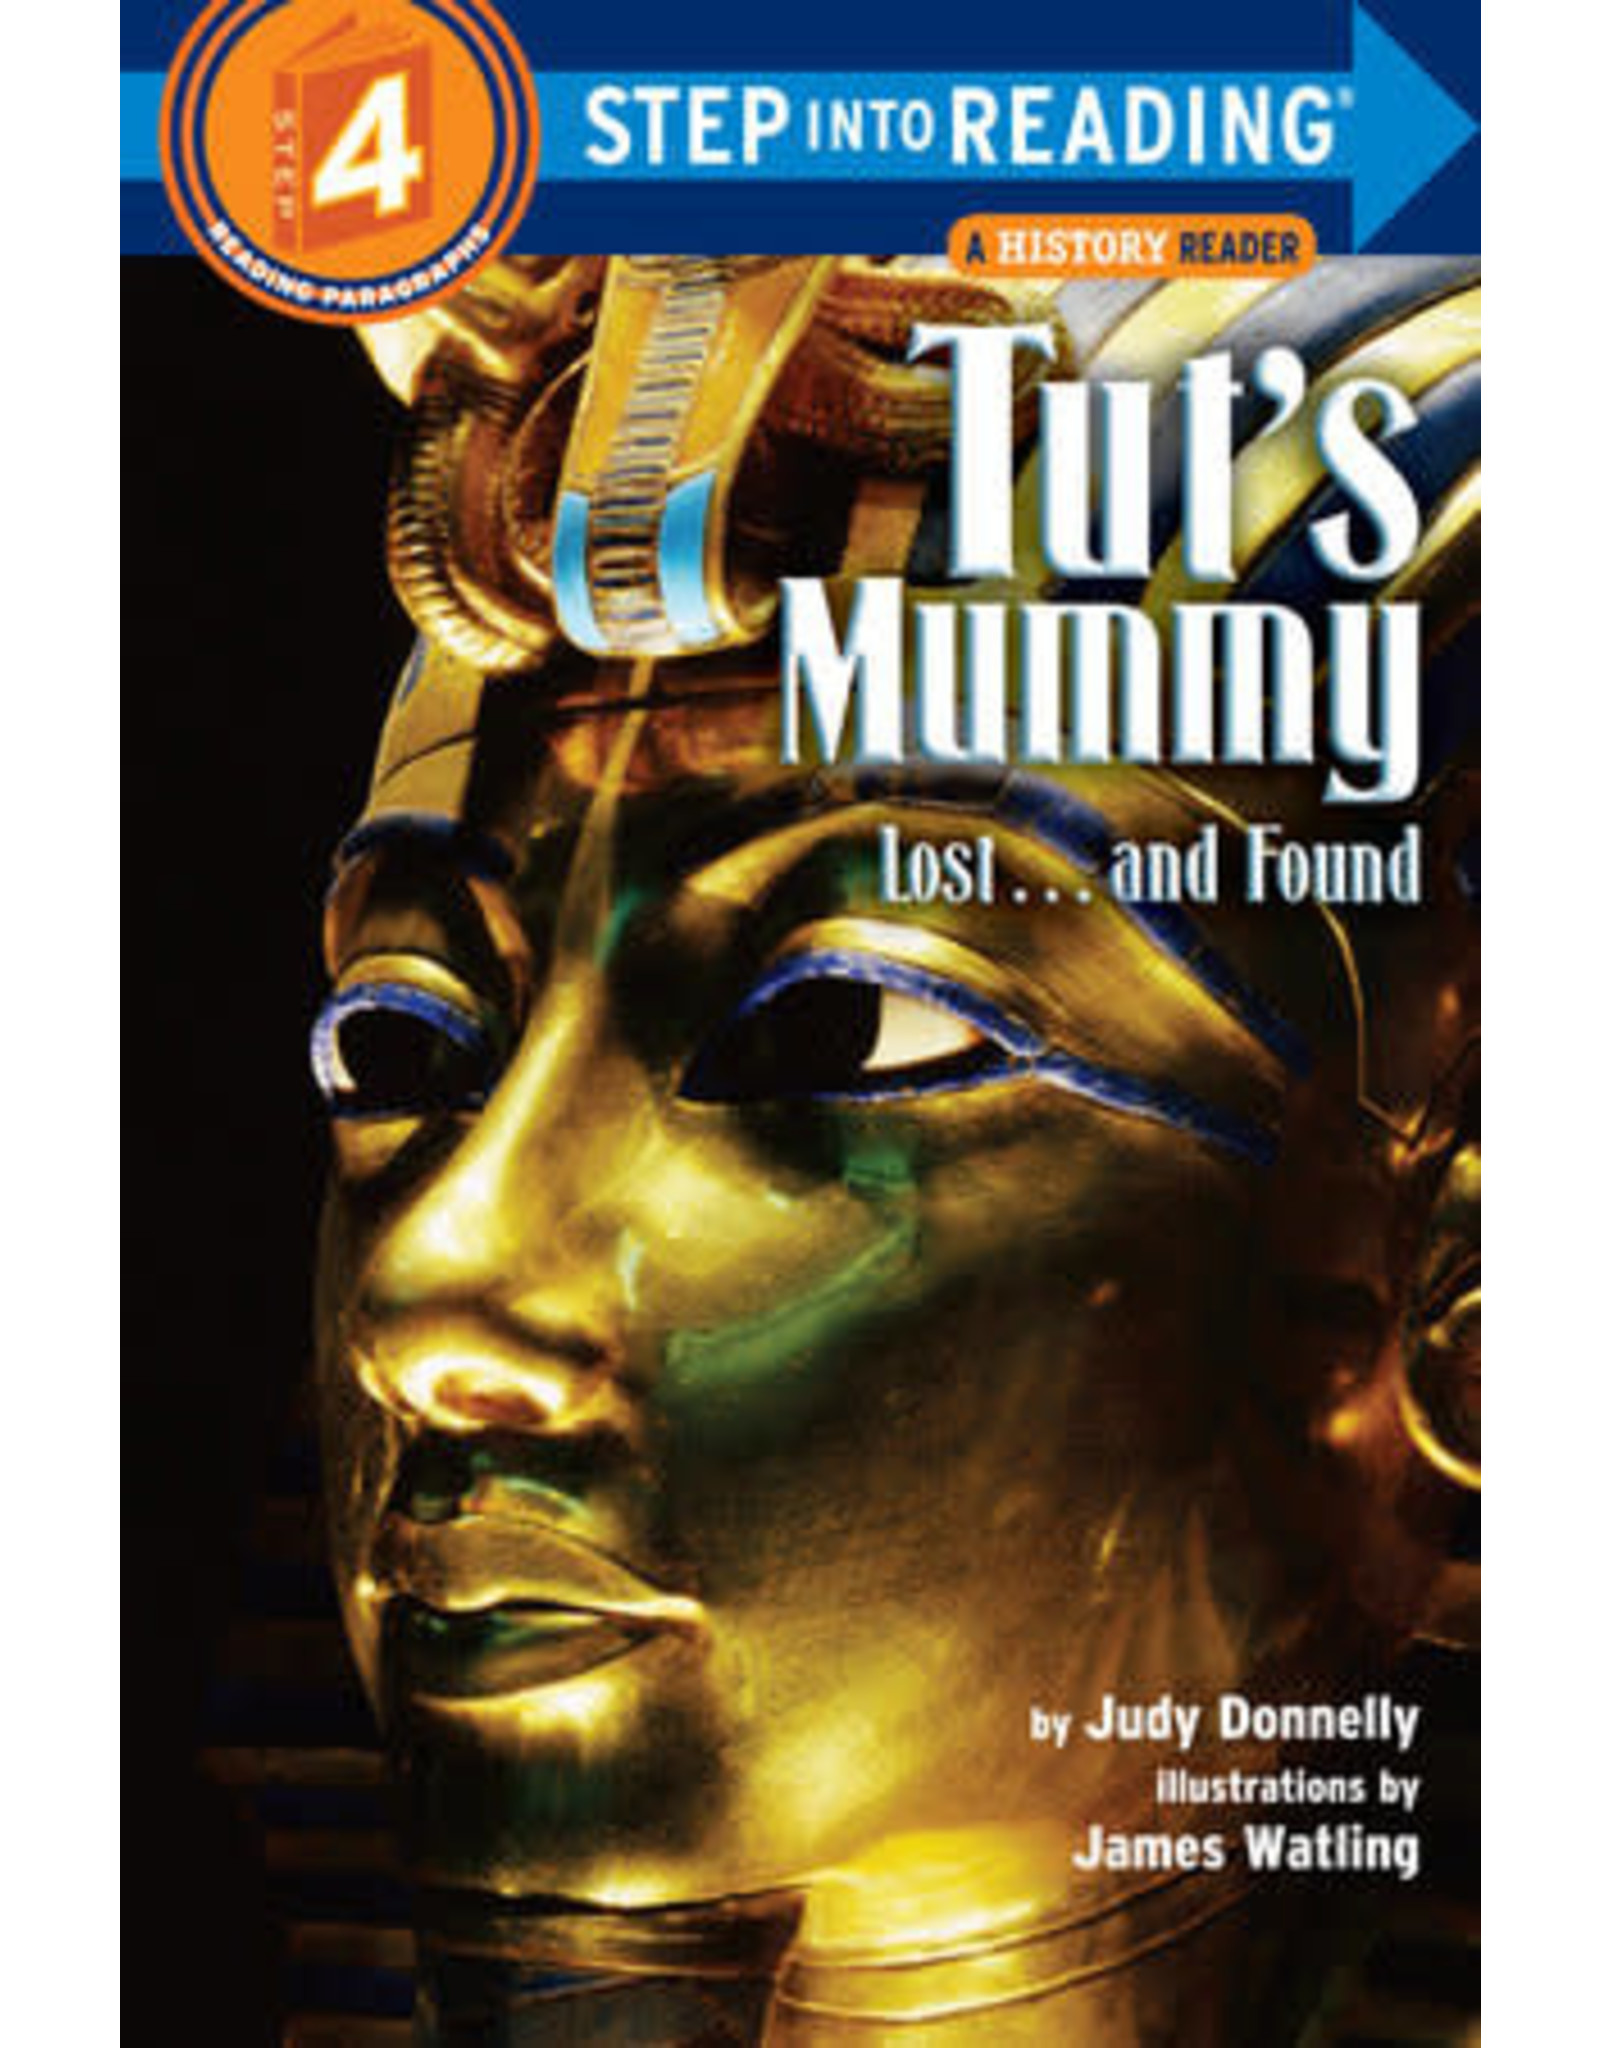 Step Into Reading Step Into Reading - Tut's Mummy (Step 4)